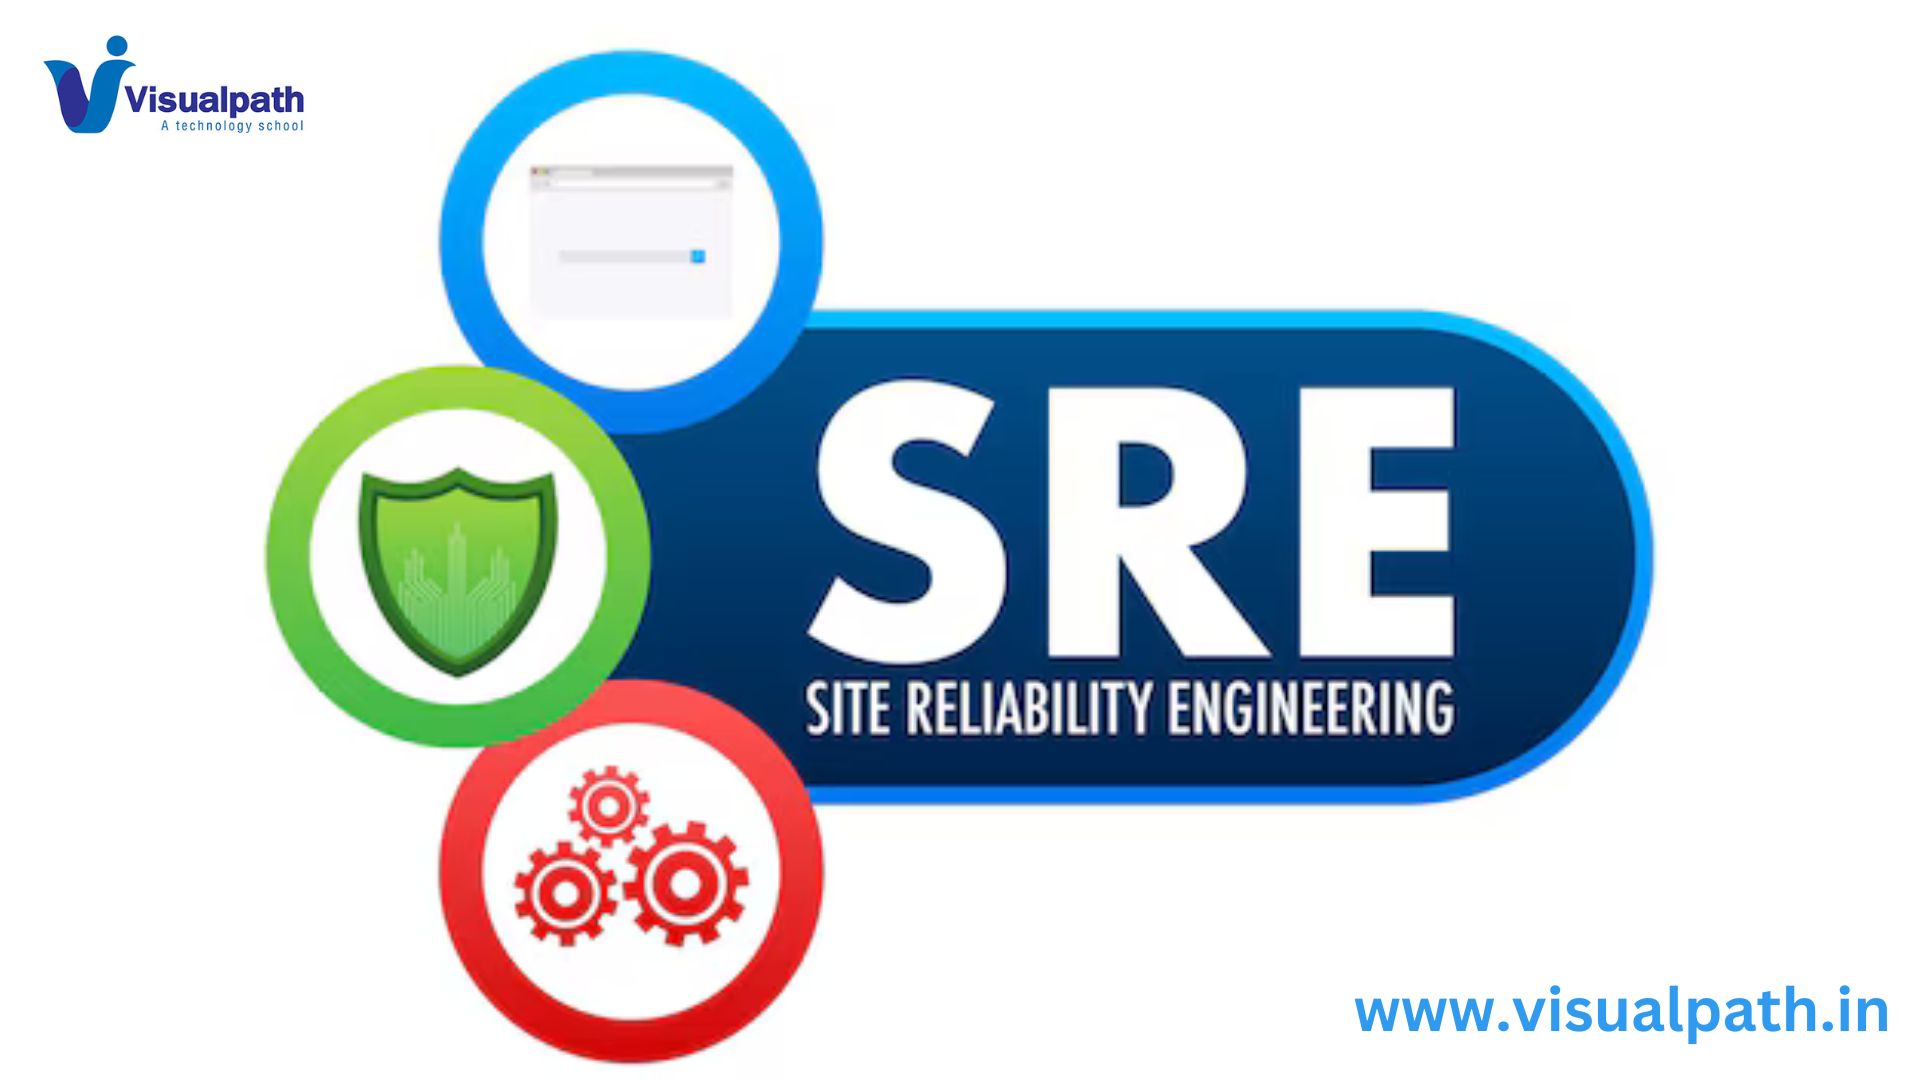 Integration to Site Reliability Engineering (SRE)